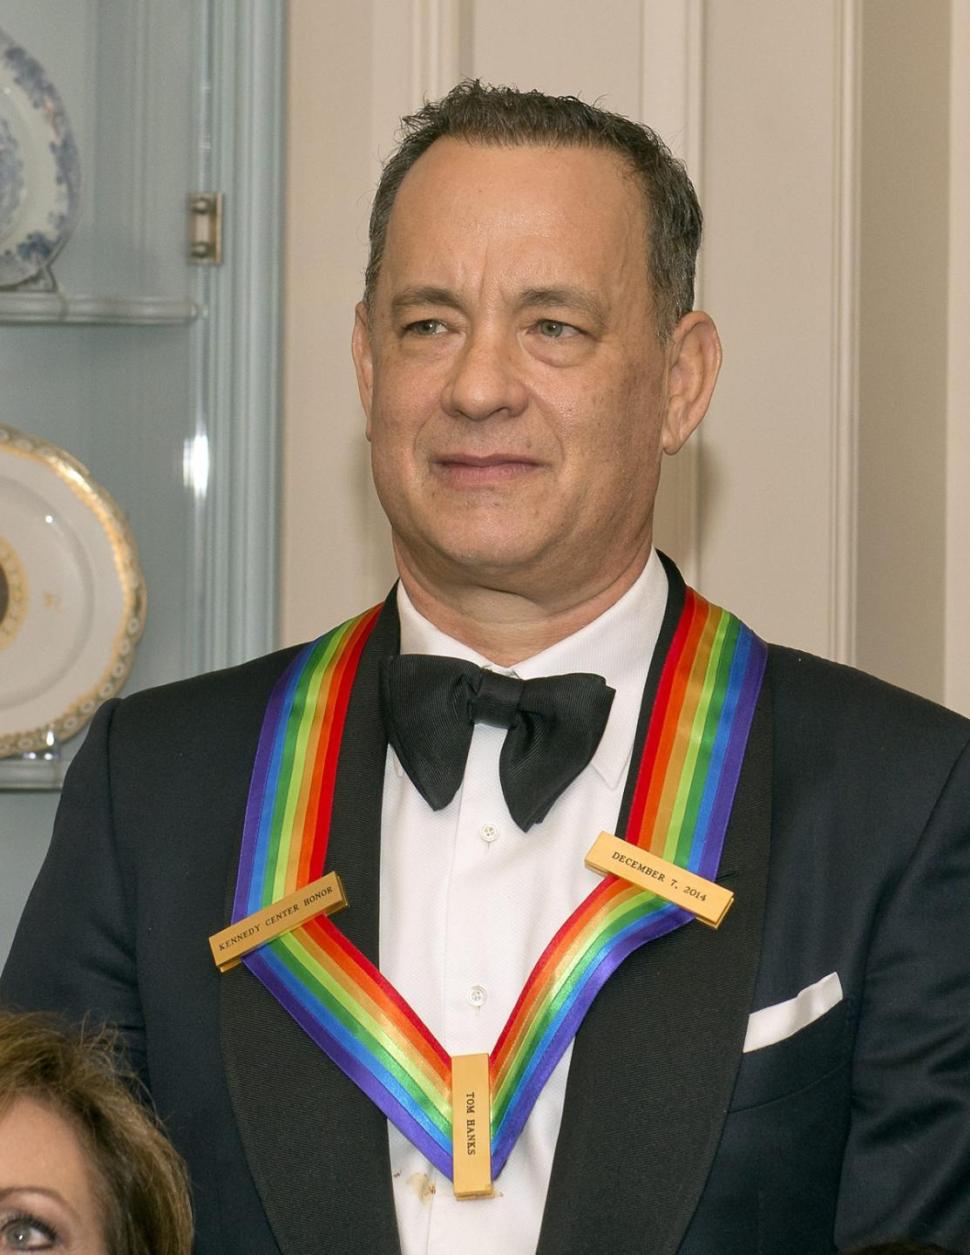 Tom Hanks praised for his roles in films such as 'Forrest Gump' and 'Saving Private Ryan.'